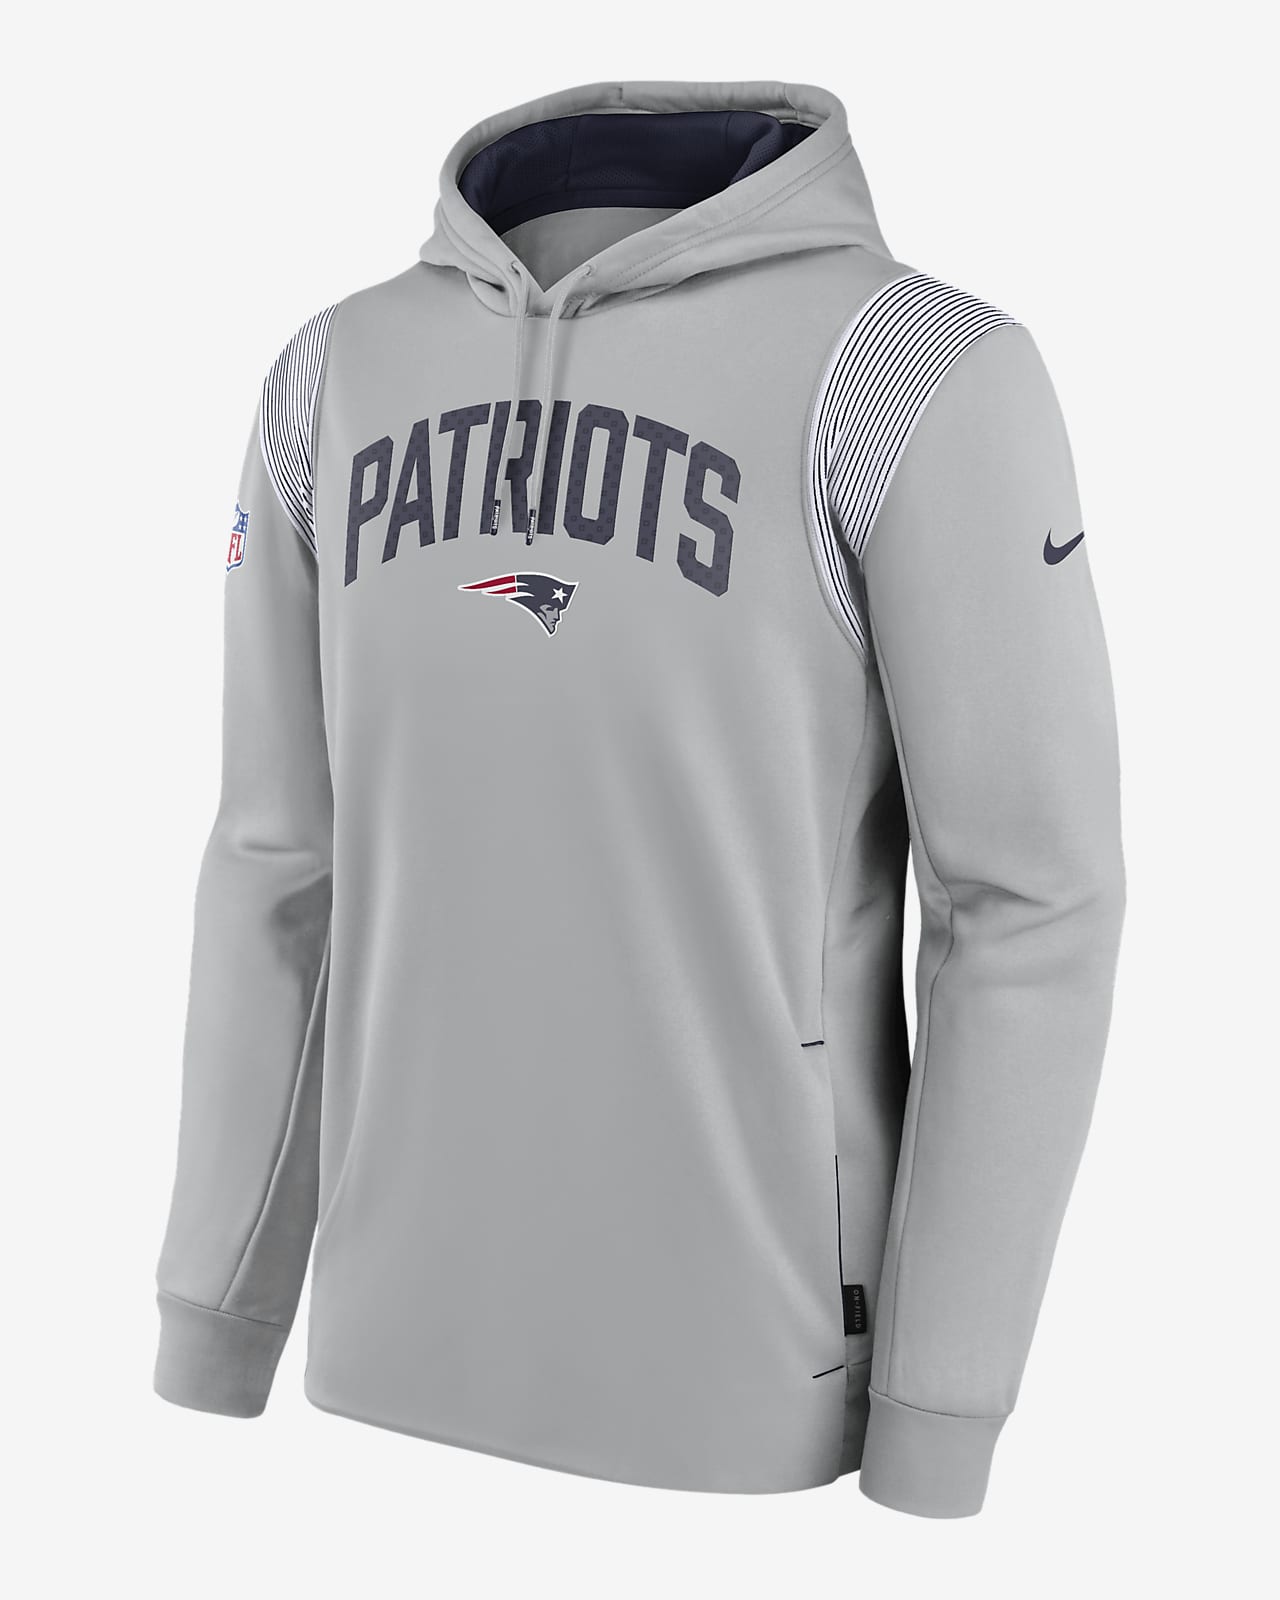 Nike Therma Athletic Stack (NFL New England Patriots) Men's Pullover Hoodie